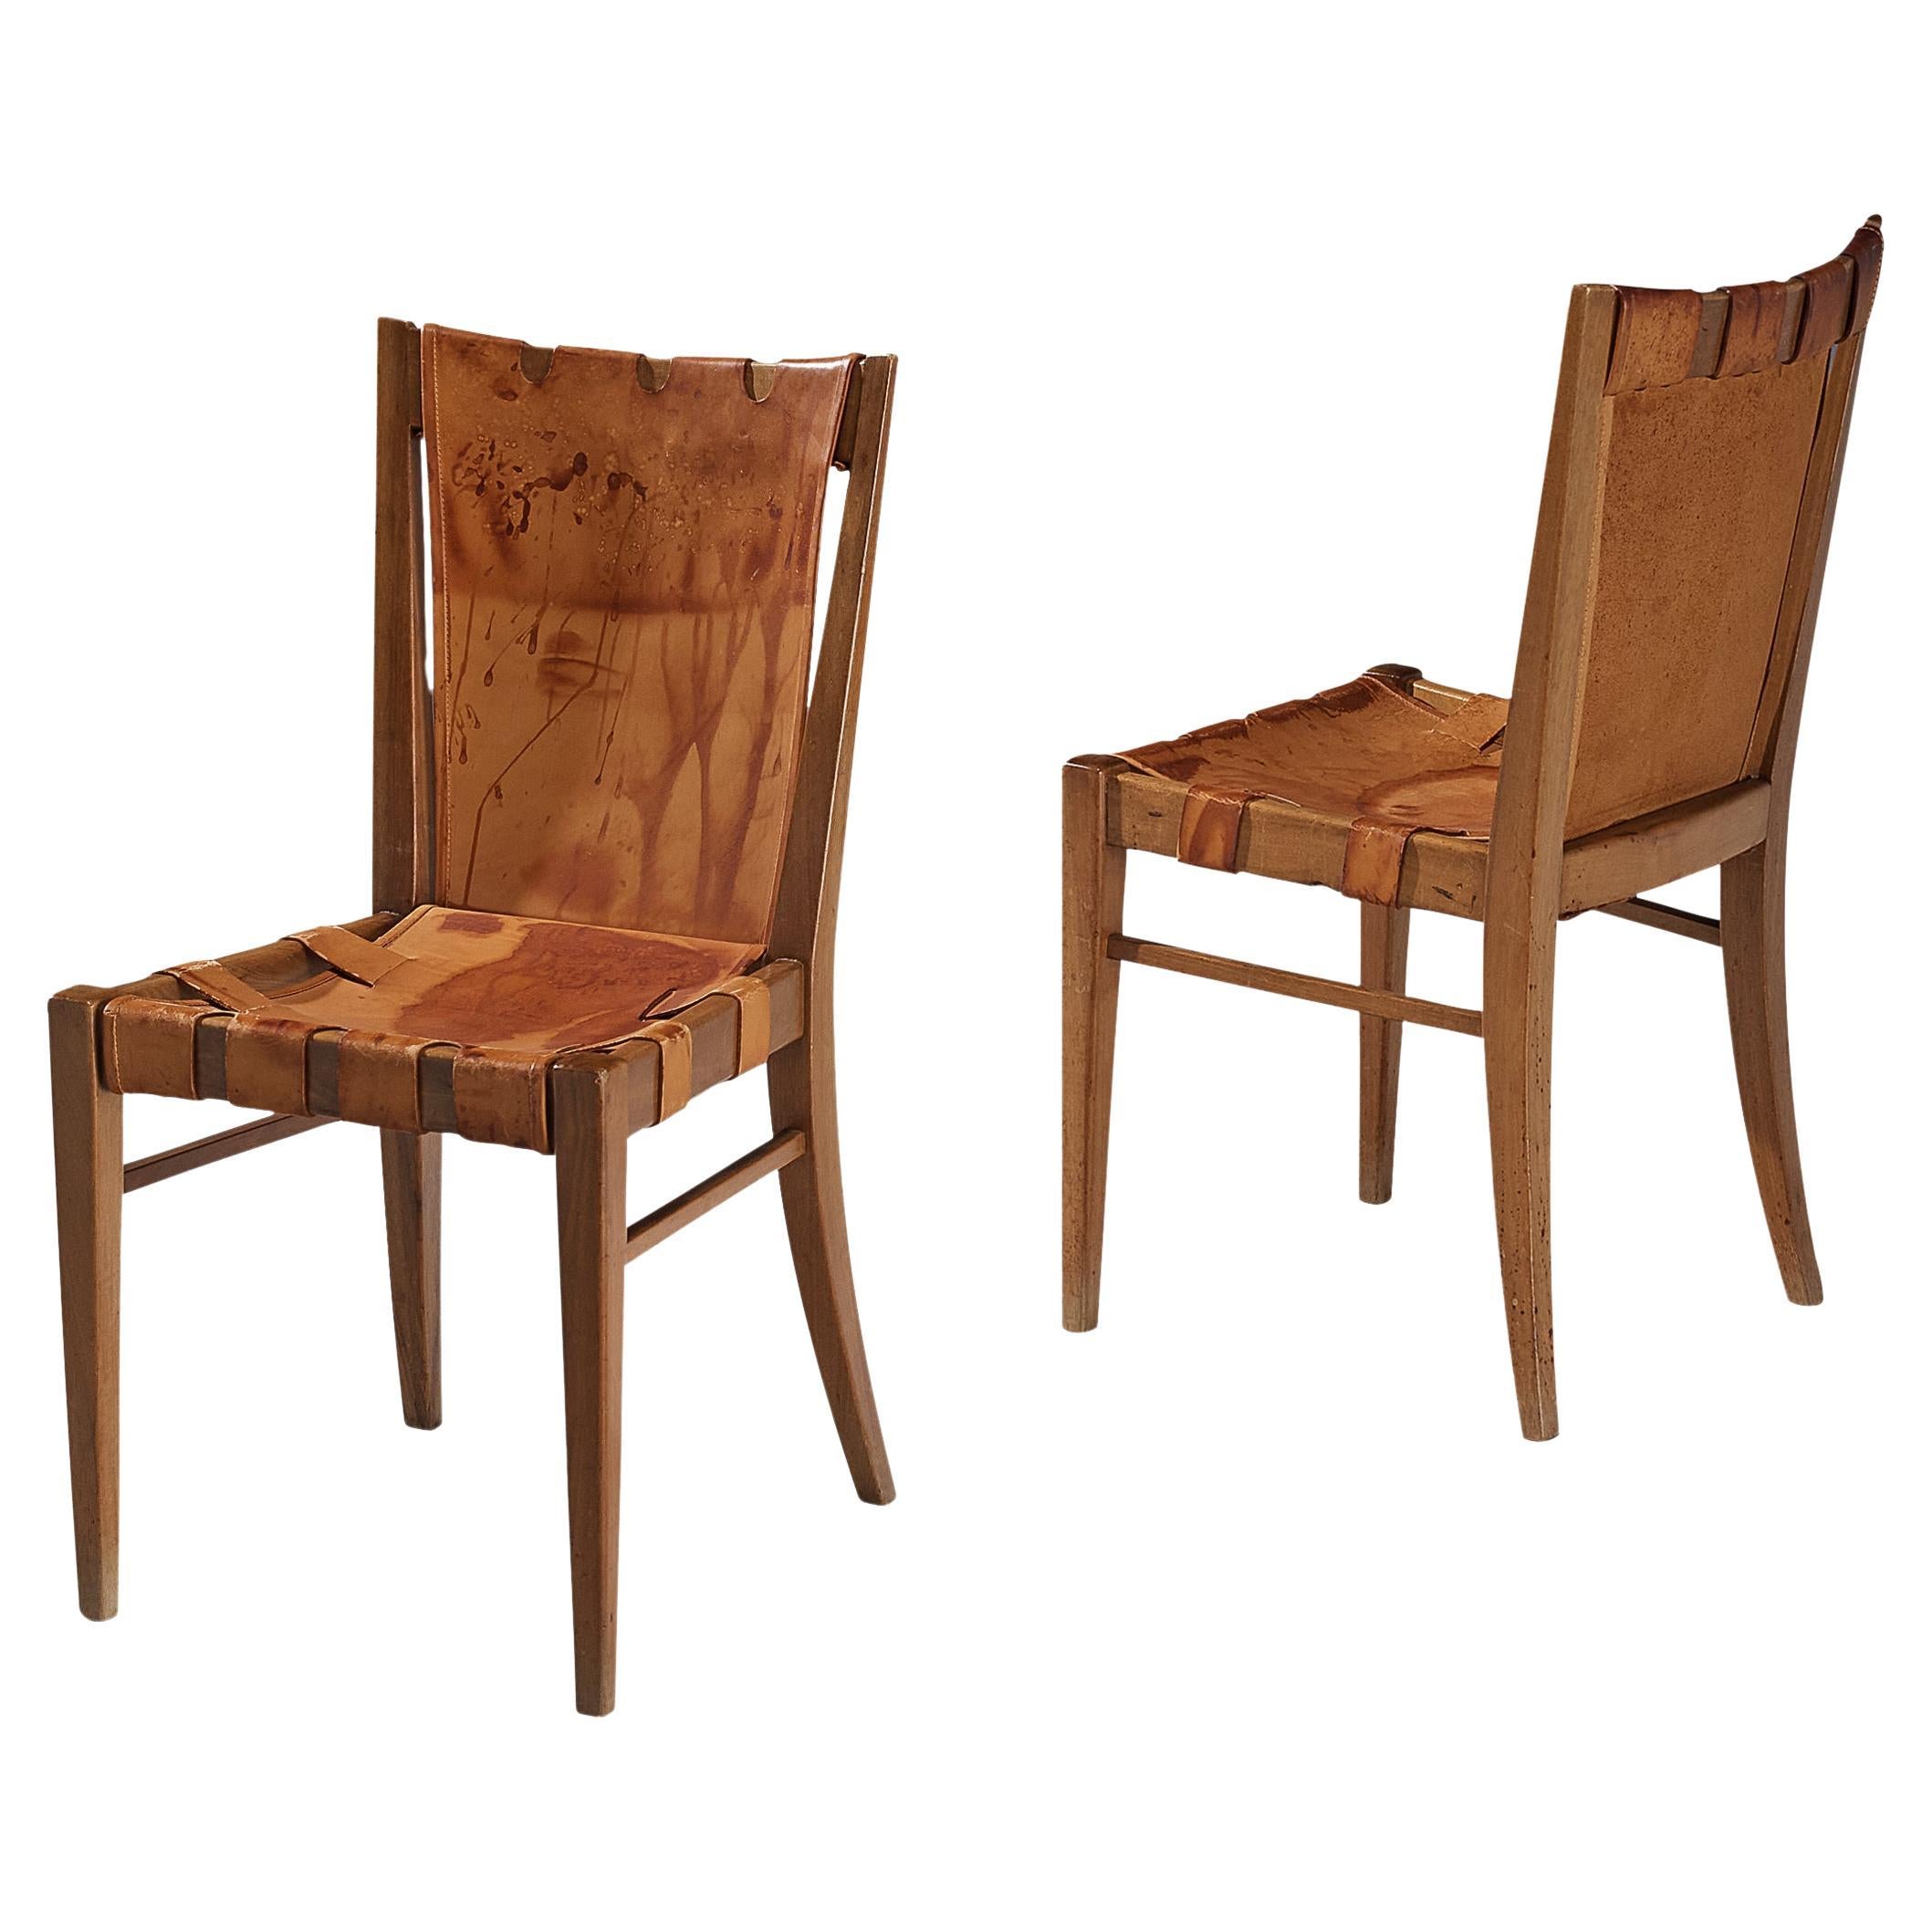 Rare Guglielmo Pecorini Pair of Chairs in Walnut and Cognac Leather For Sale